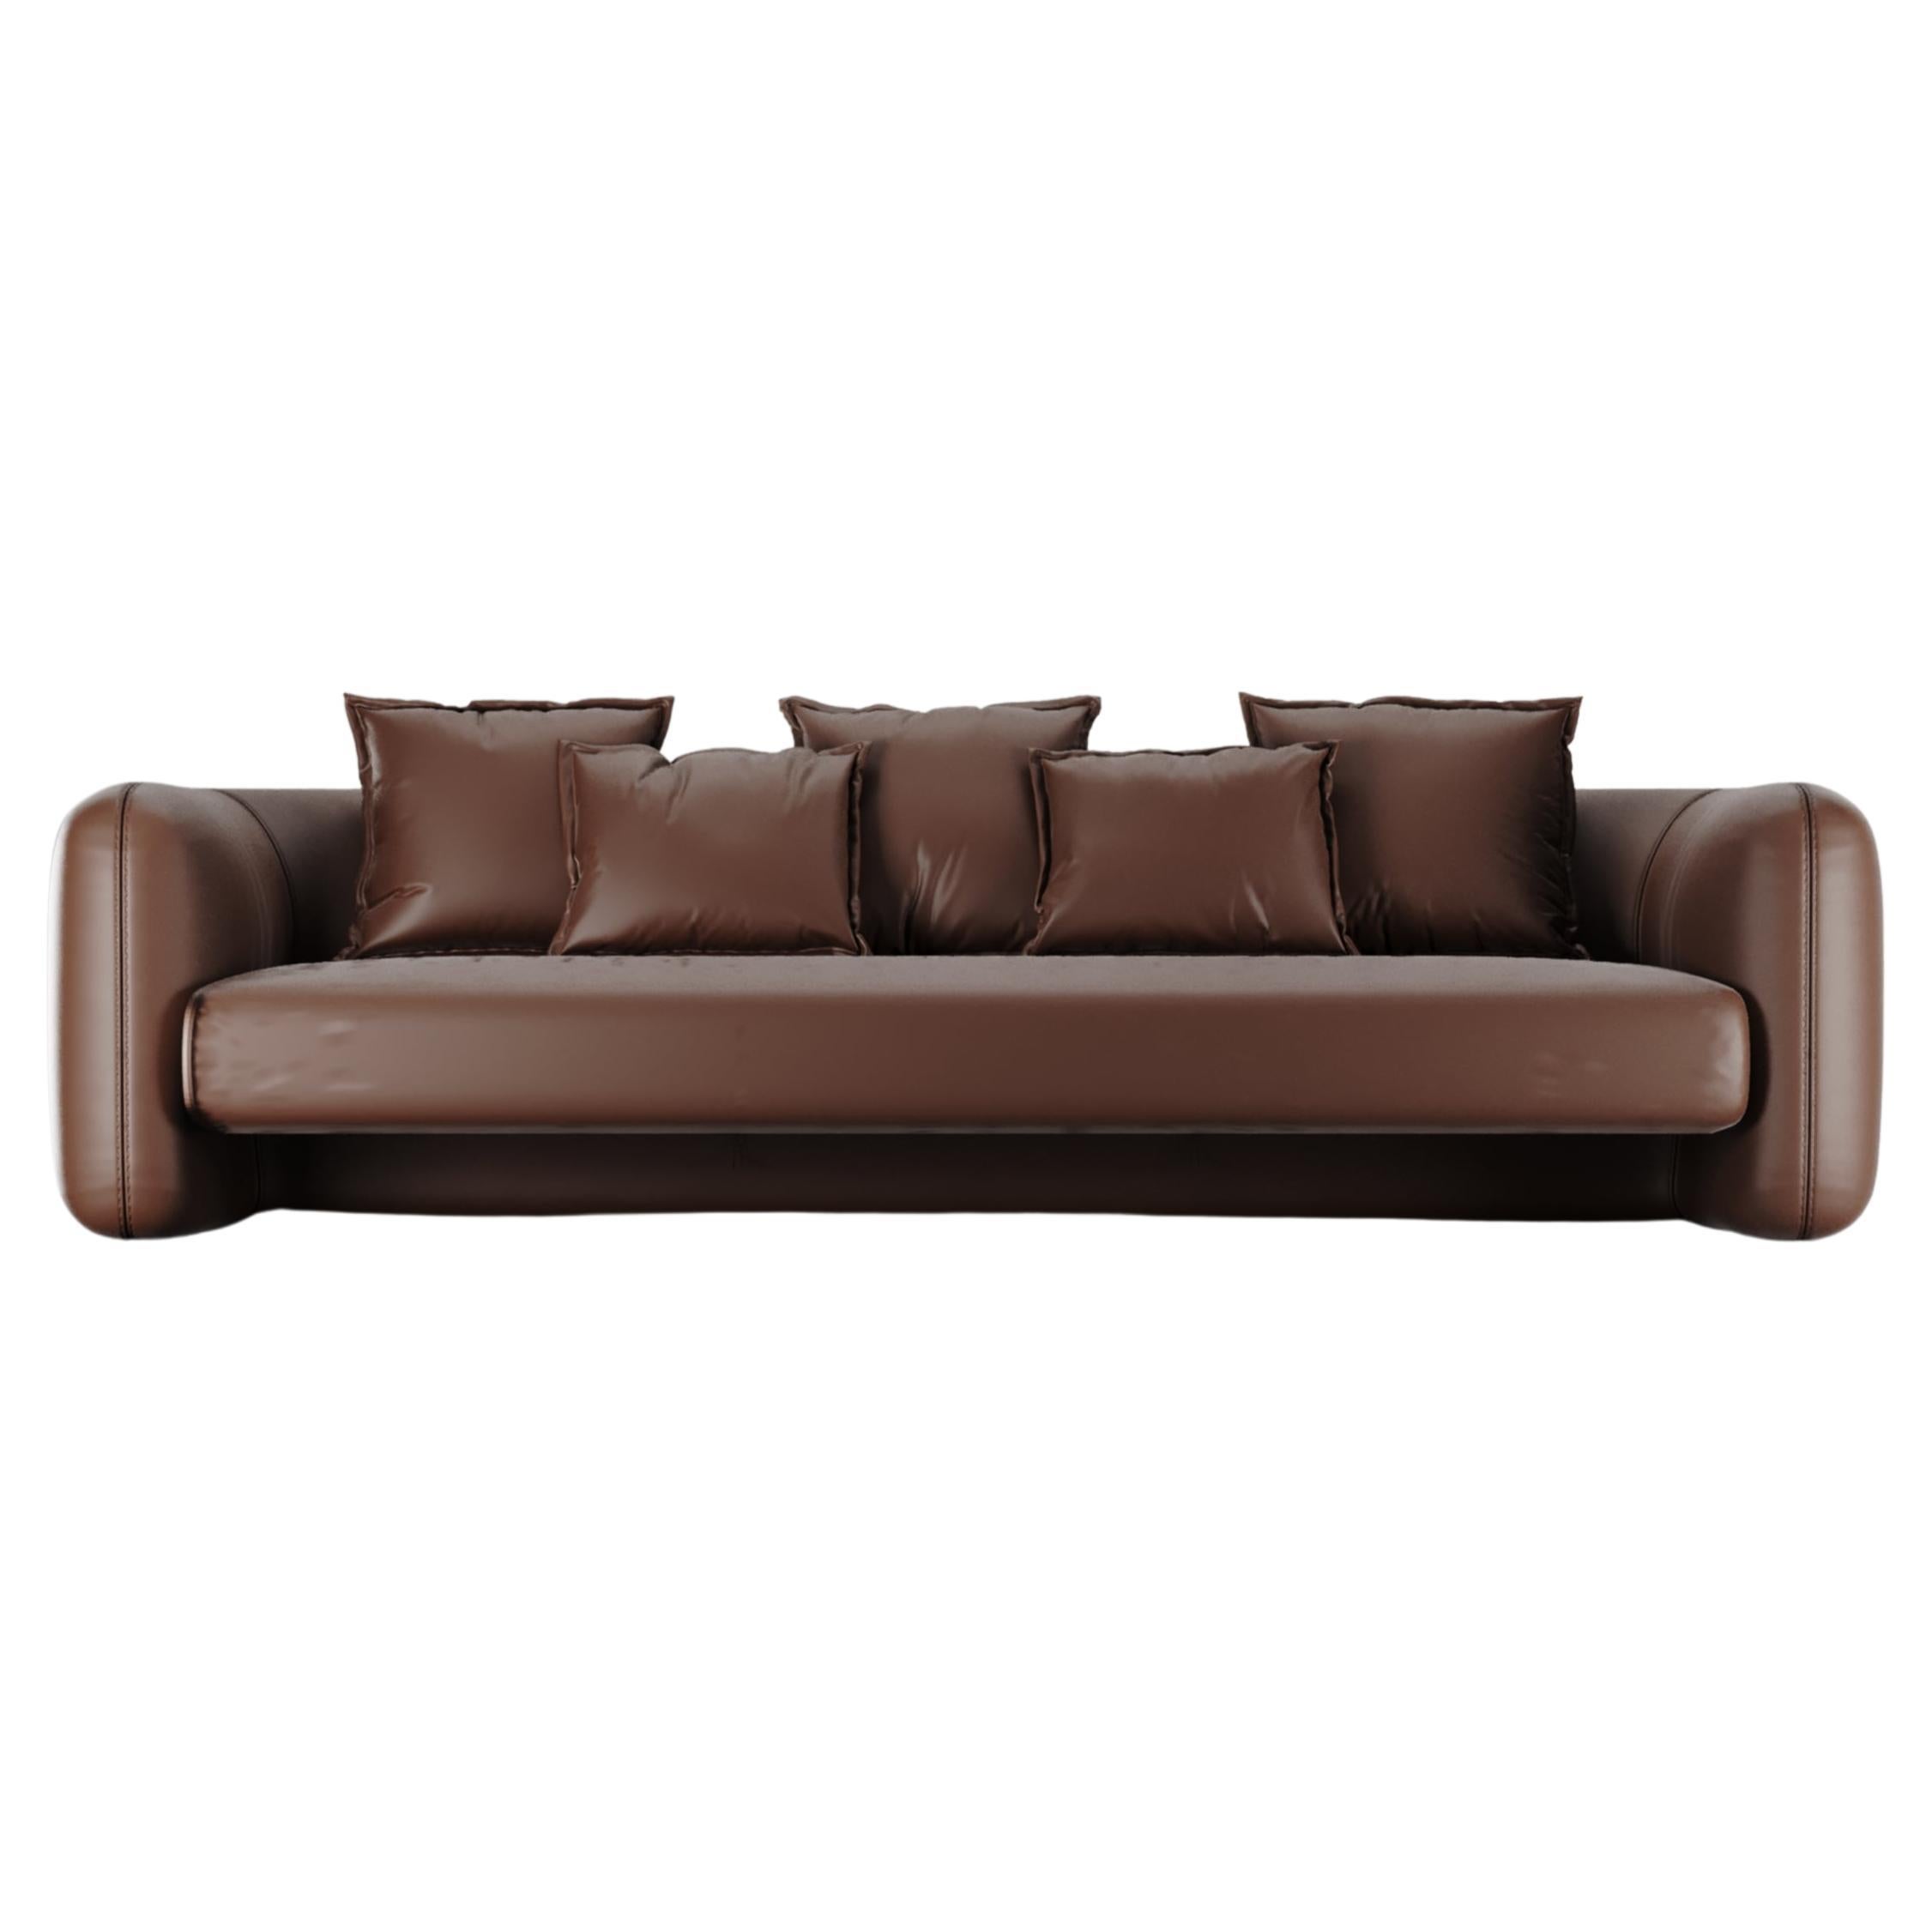 Contemporary Modern Jacob Sofa in Leather by Collector Studio